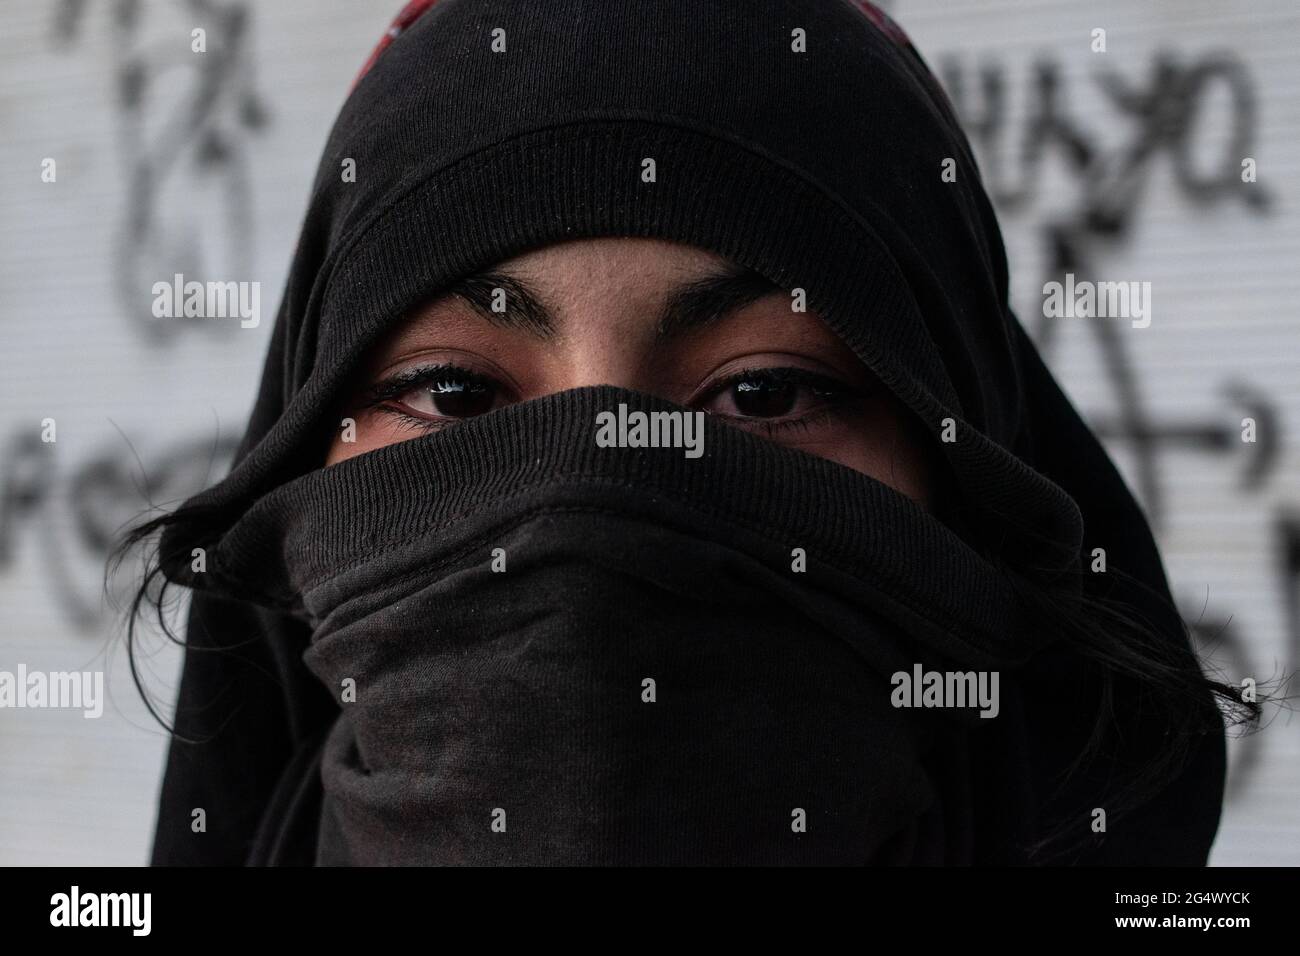 Bogota, Colombia. 21st June, 2021. A portrait of a women from the front line as clashes between demonstratros and Colombia's riot police erupt anti-government protest raise in Bogota Colombia against the government of president Ivan Duque, inequalities and abuse of authority by police. Credit: Long Visual Press/Alamy Live News Stock Photo